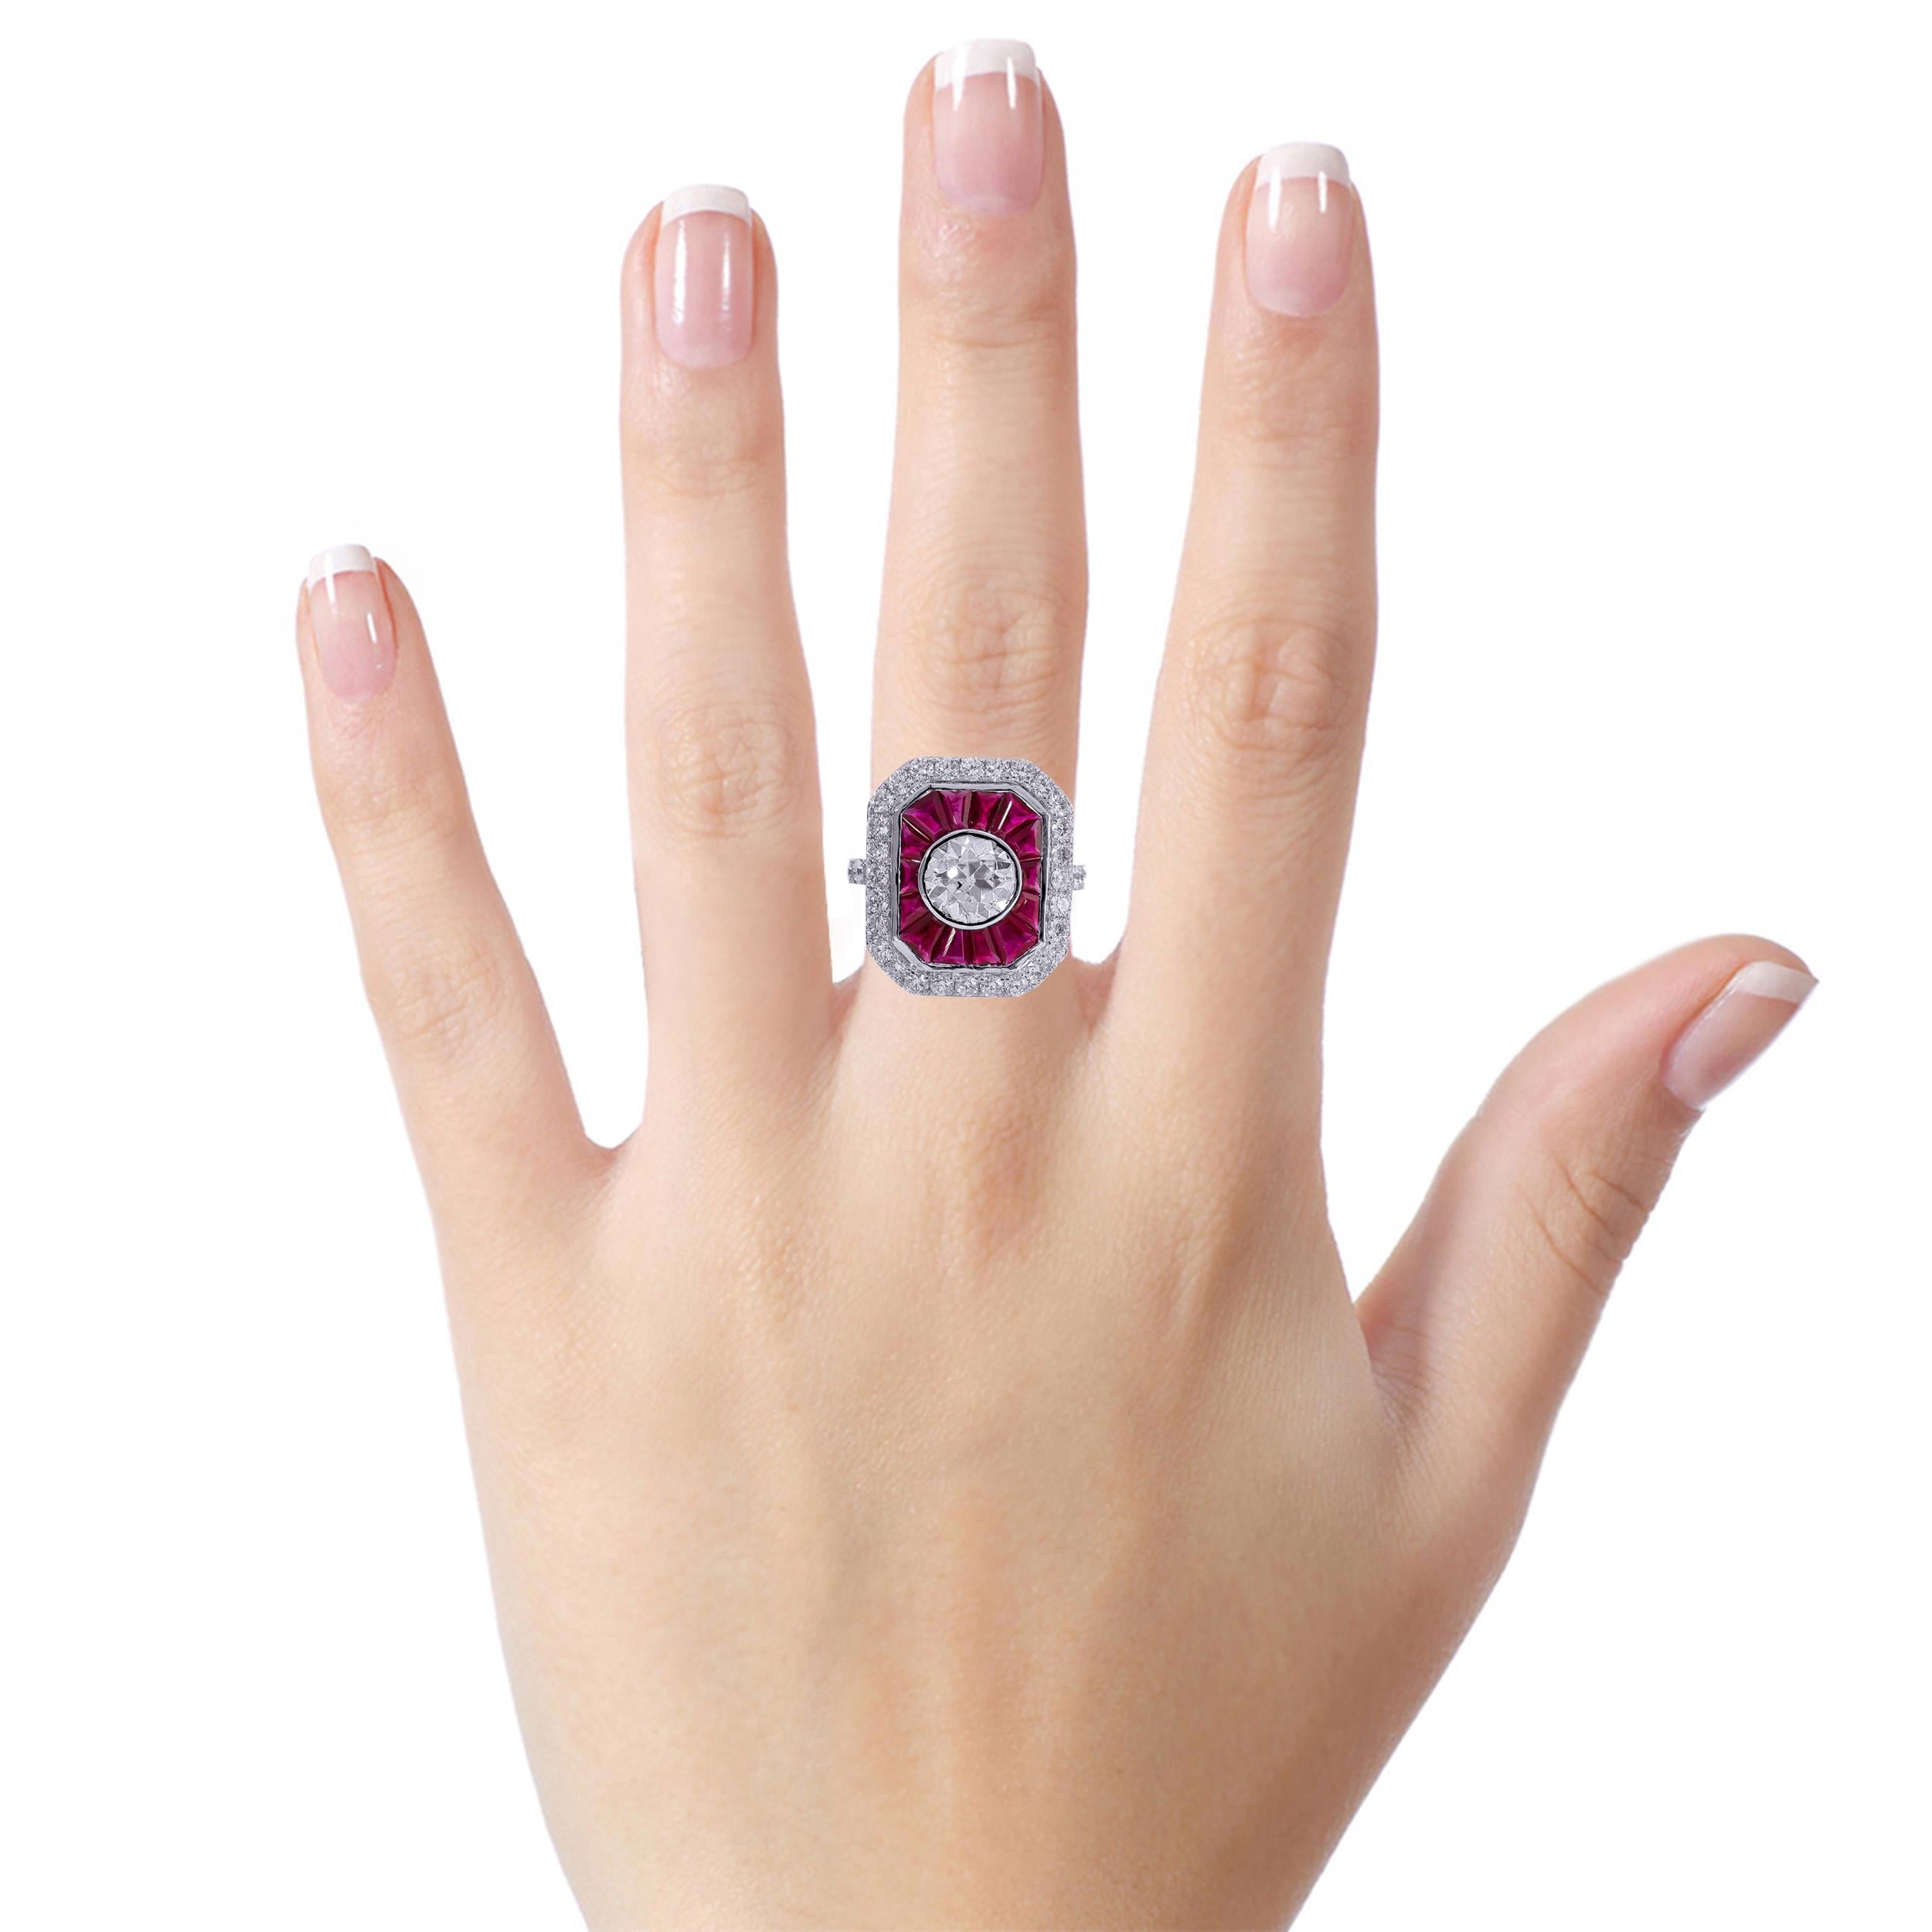 1.05 Carat Old European Cut Diamond with Ruby Statement Ring in 18 Karat Gold

This articulate contemporary old mutual/European cut diamond solitaire and unusual cut pigeon blood ruby ring is a magnificent lively design. The diamond round solitaire